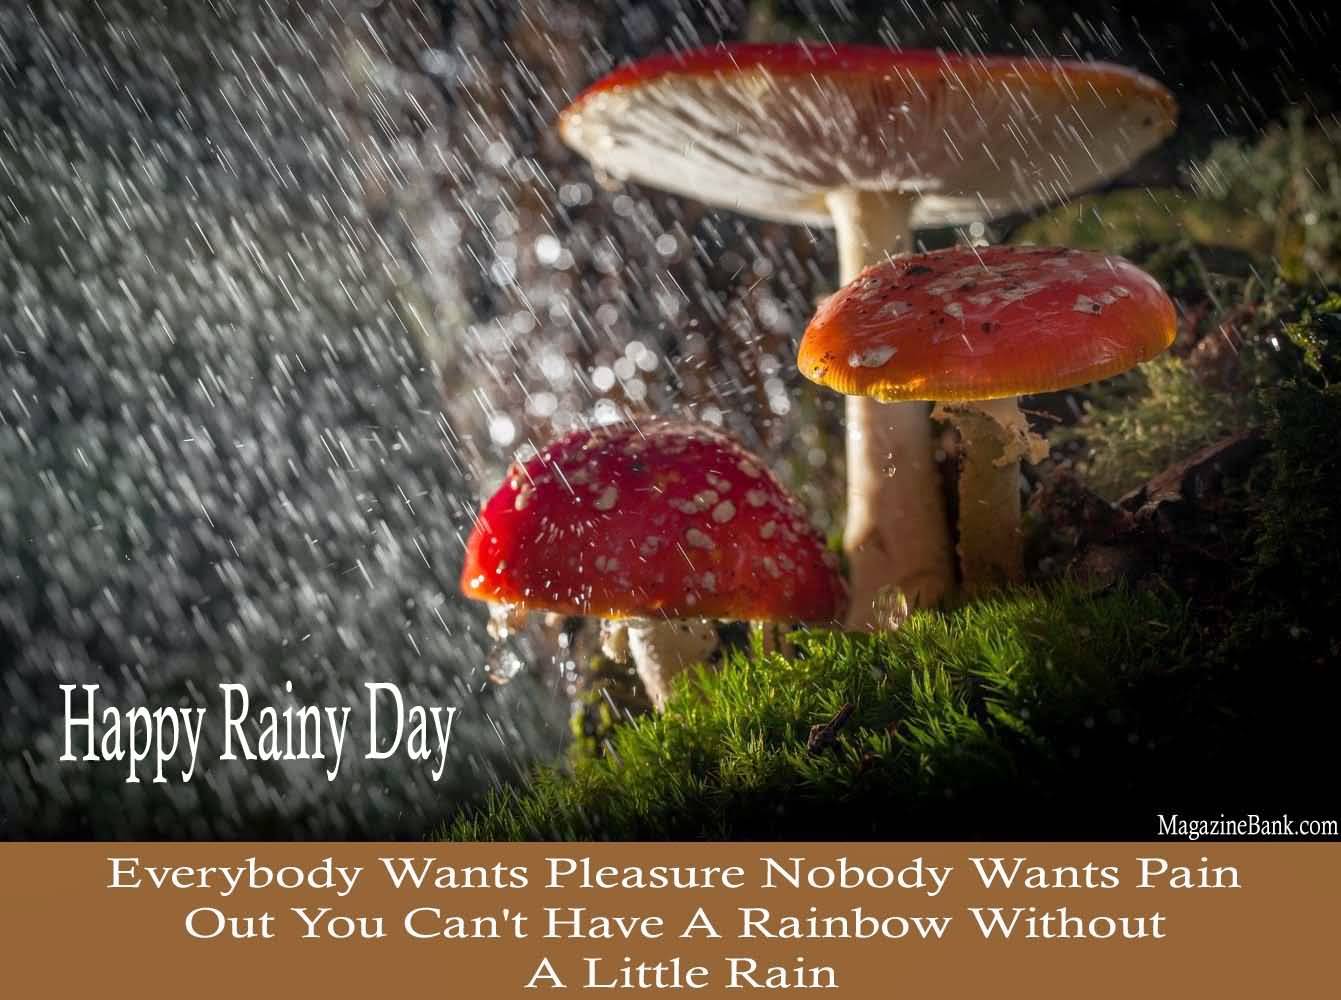 Happy Rainy Day Everybody Wants Pleasure Nobody Wants Pain Out You Can't Have A Rainbow Without A Little Rain.